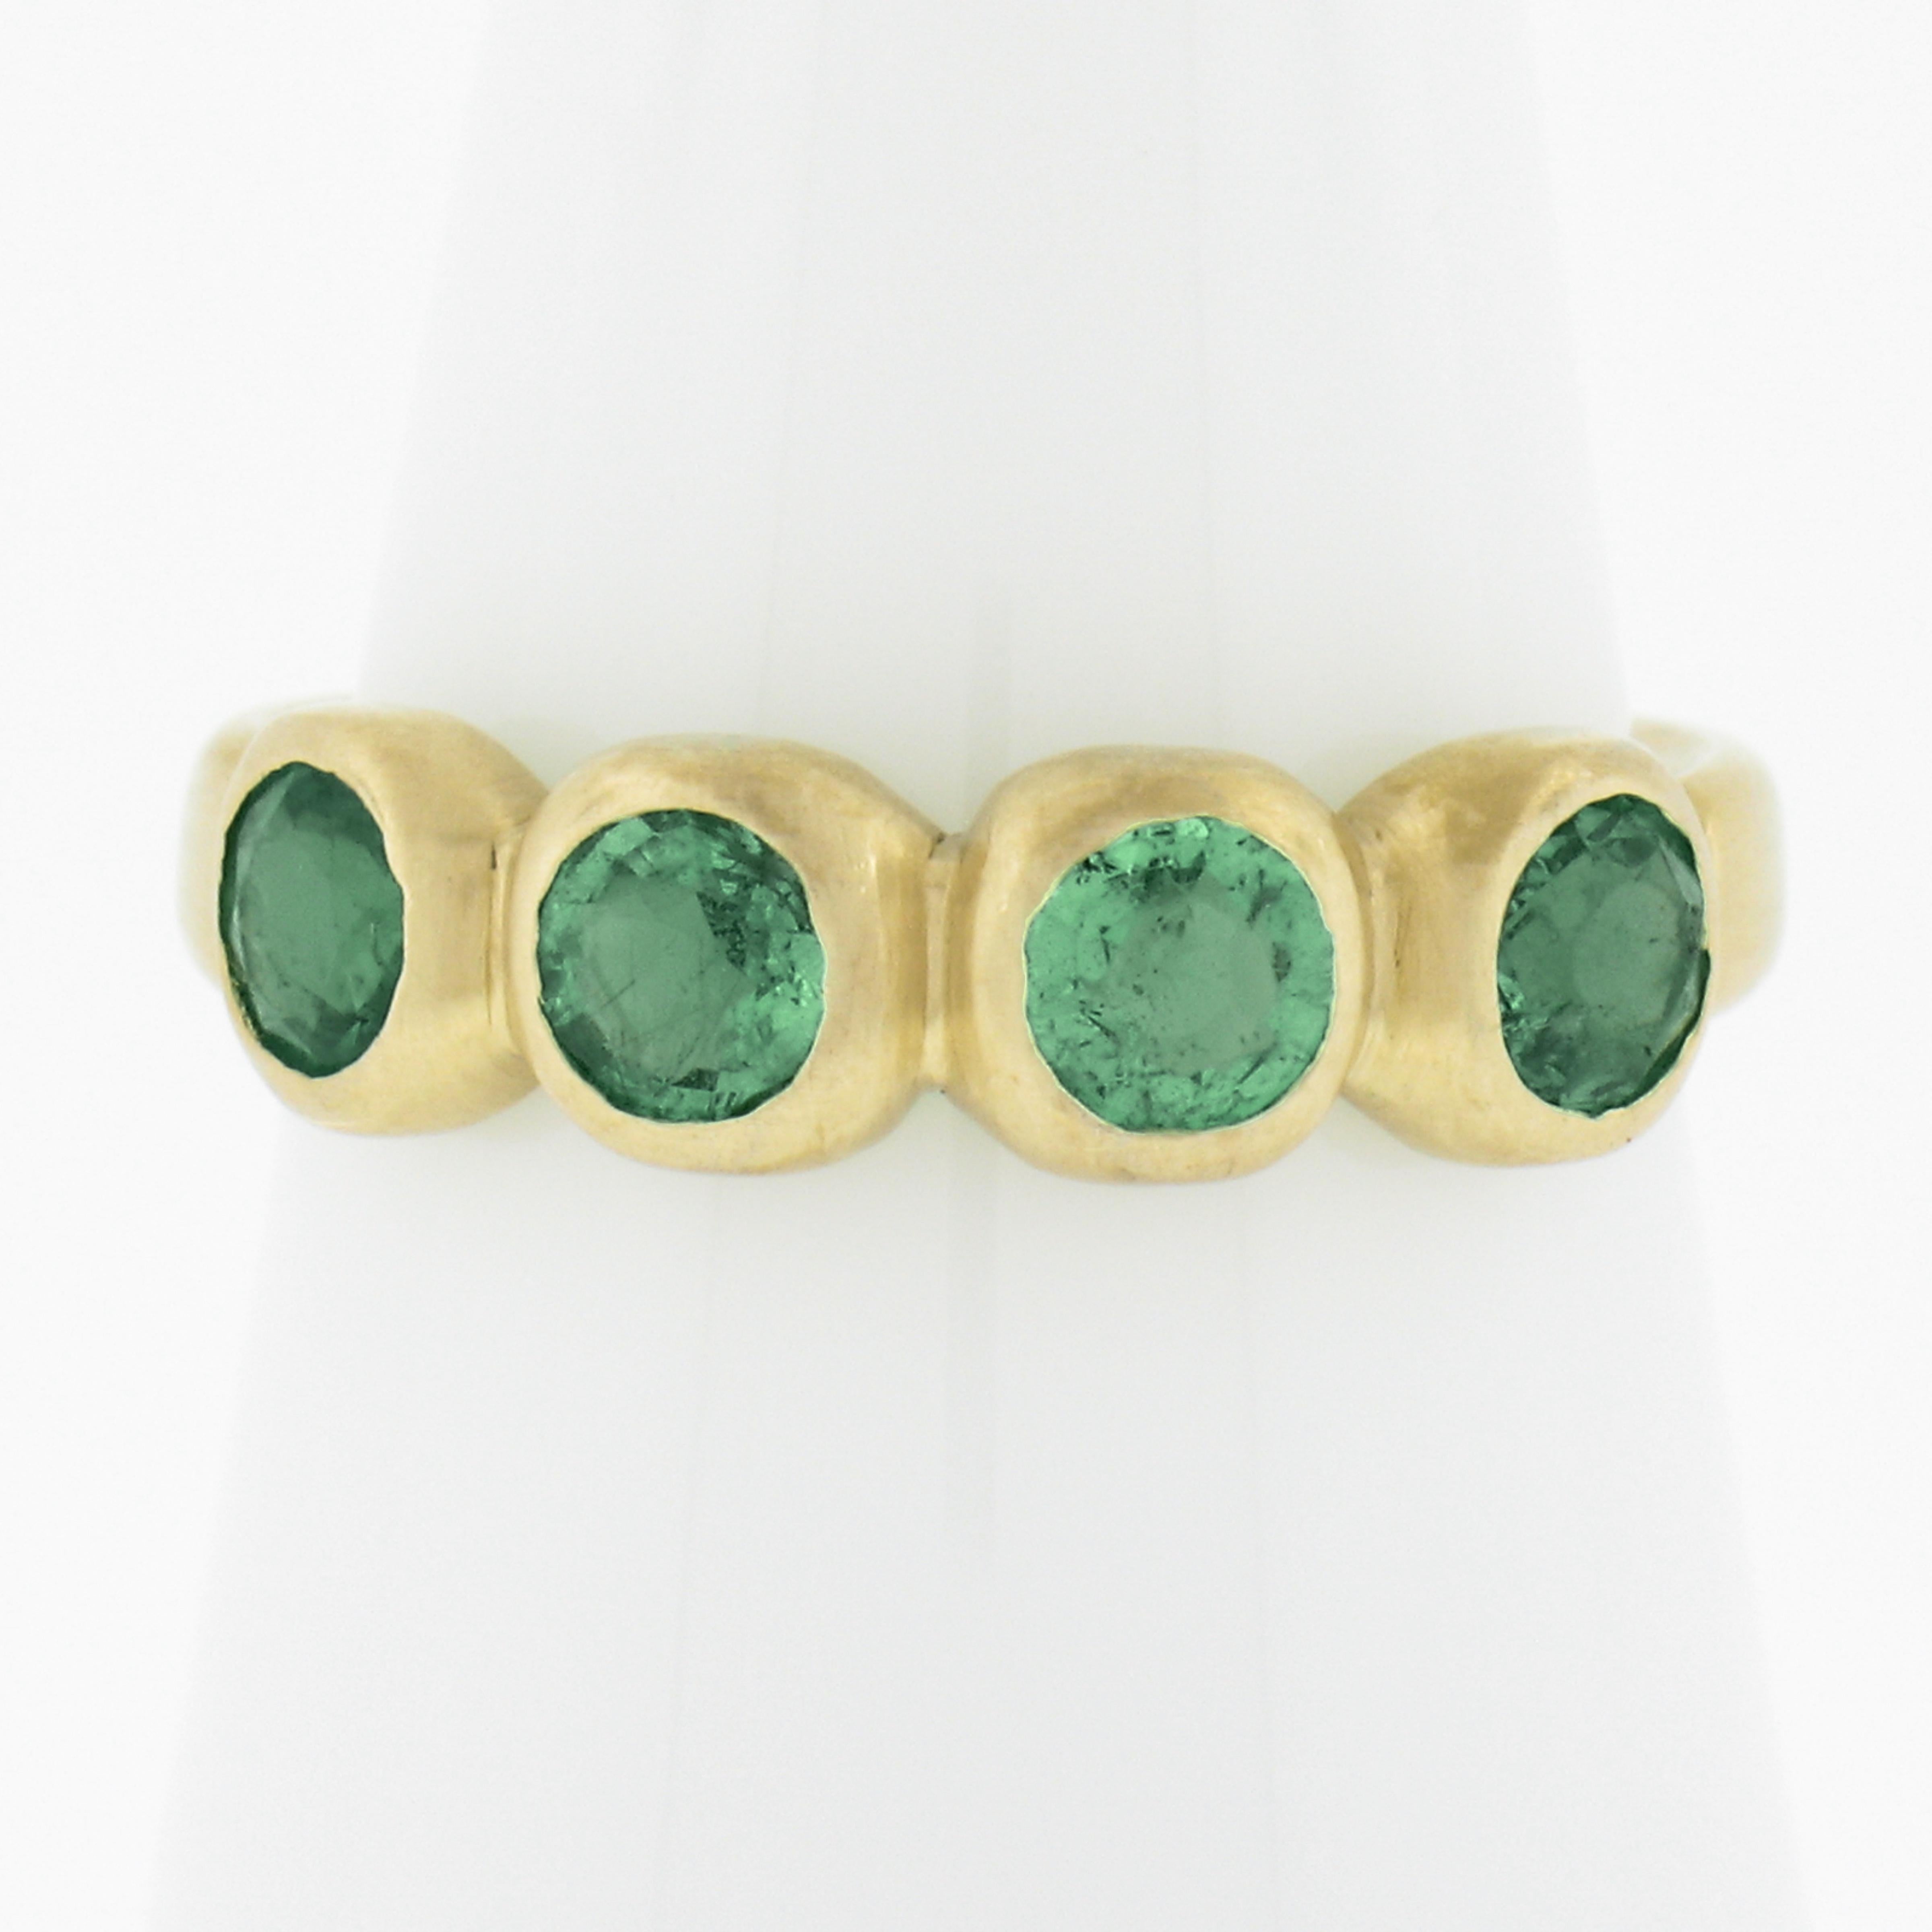 --Stone(s):--
(4) Natural Genuine Emeralds - Round Brilliant Cut - Bezel Set - Light To Medium Green Color 
Total Carat Weight:	1.0-1.20 (approx.)

Material: Solid 18K Yellow Gold
Weight: 3.85 Grams
Ring Size: 7.0 (Fitted on a finger. We can custom